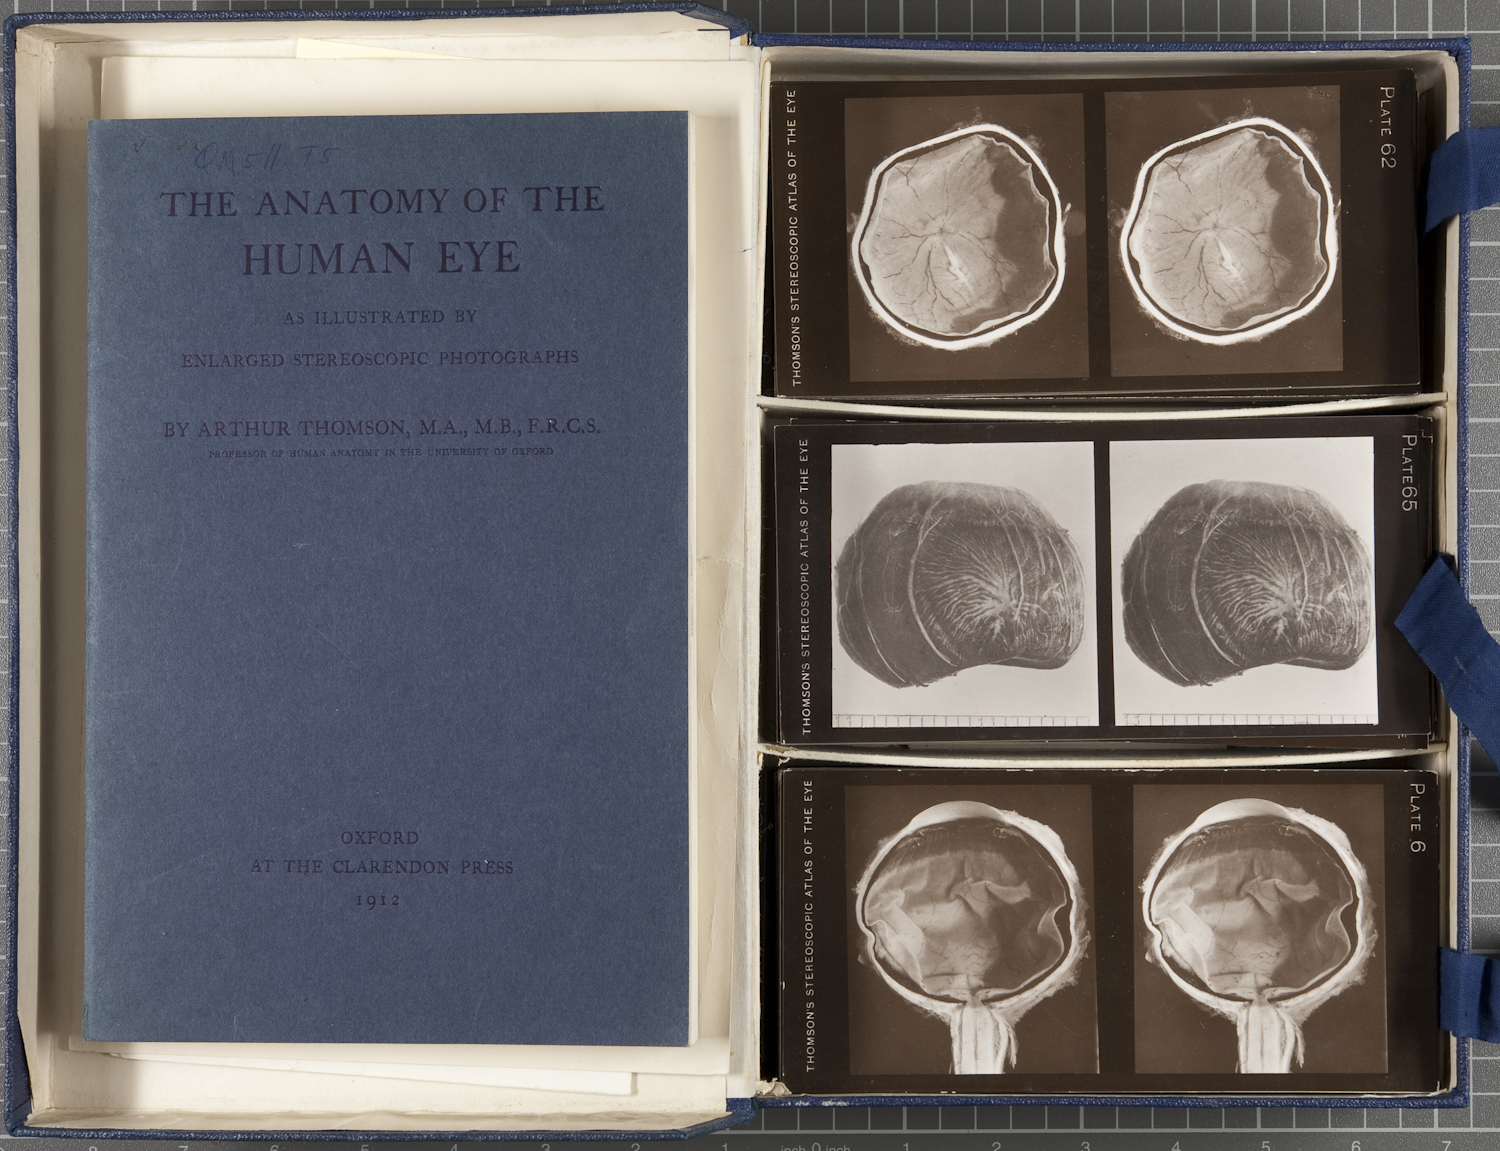 The anatomy of the human eye, as illustrated by enlarged stereoscopic photographs, Oxford : At the Clarendon Press, 1912.